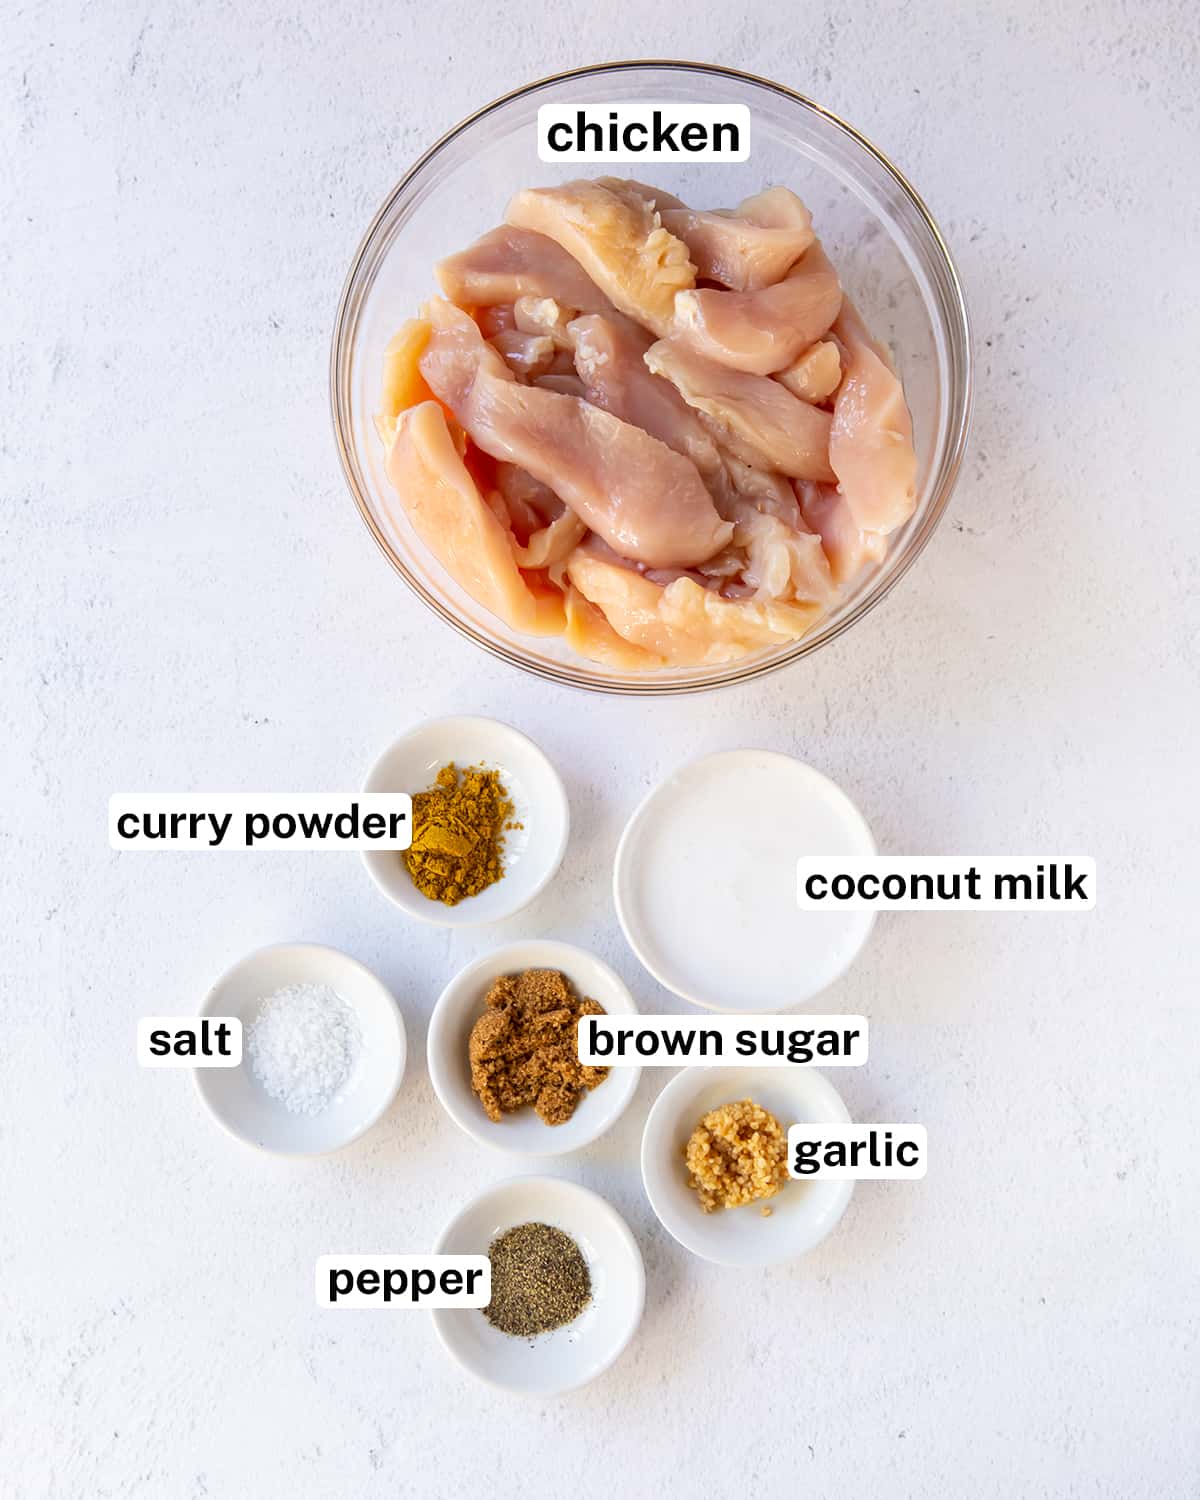 Ingredients for chicken satay with text overlay.